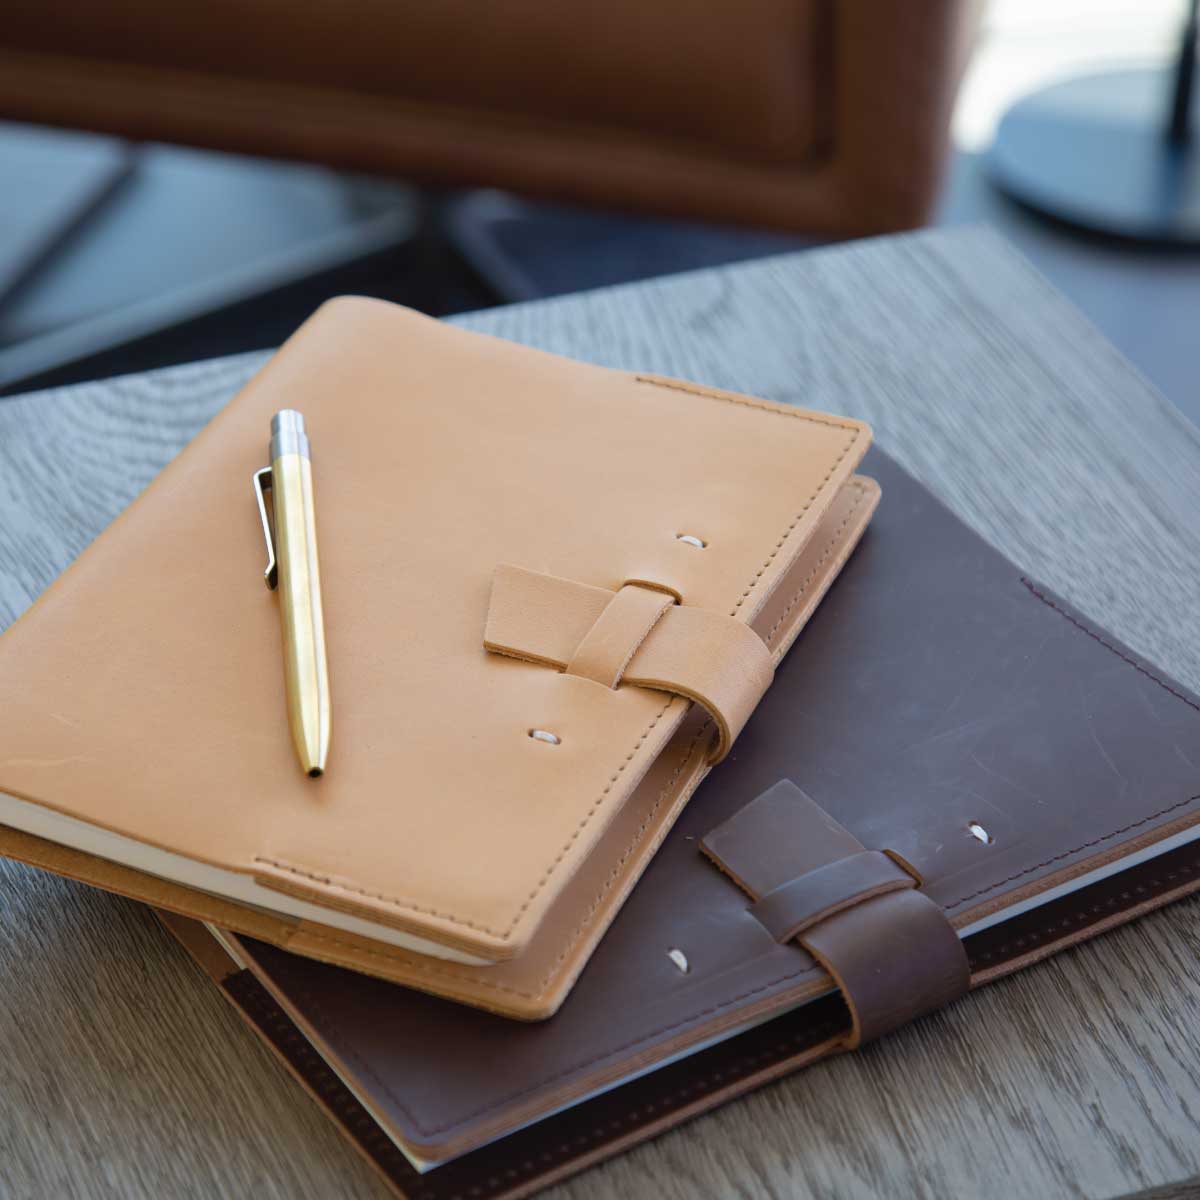 Rustico BK0205-0005 Switchback Leather Notebook Medium in Natural